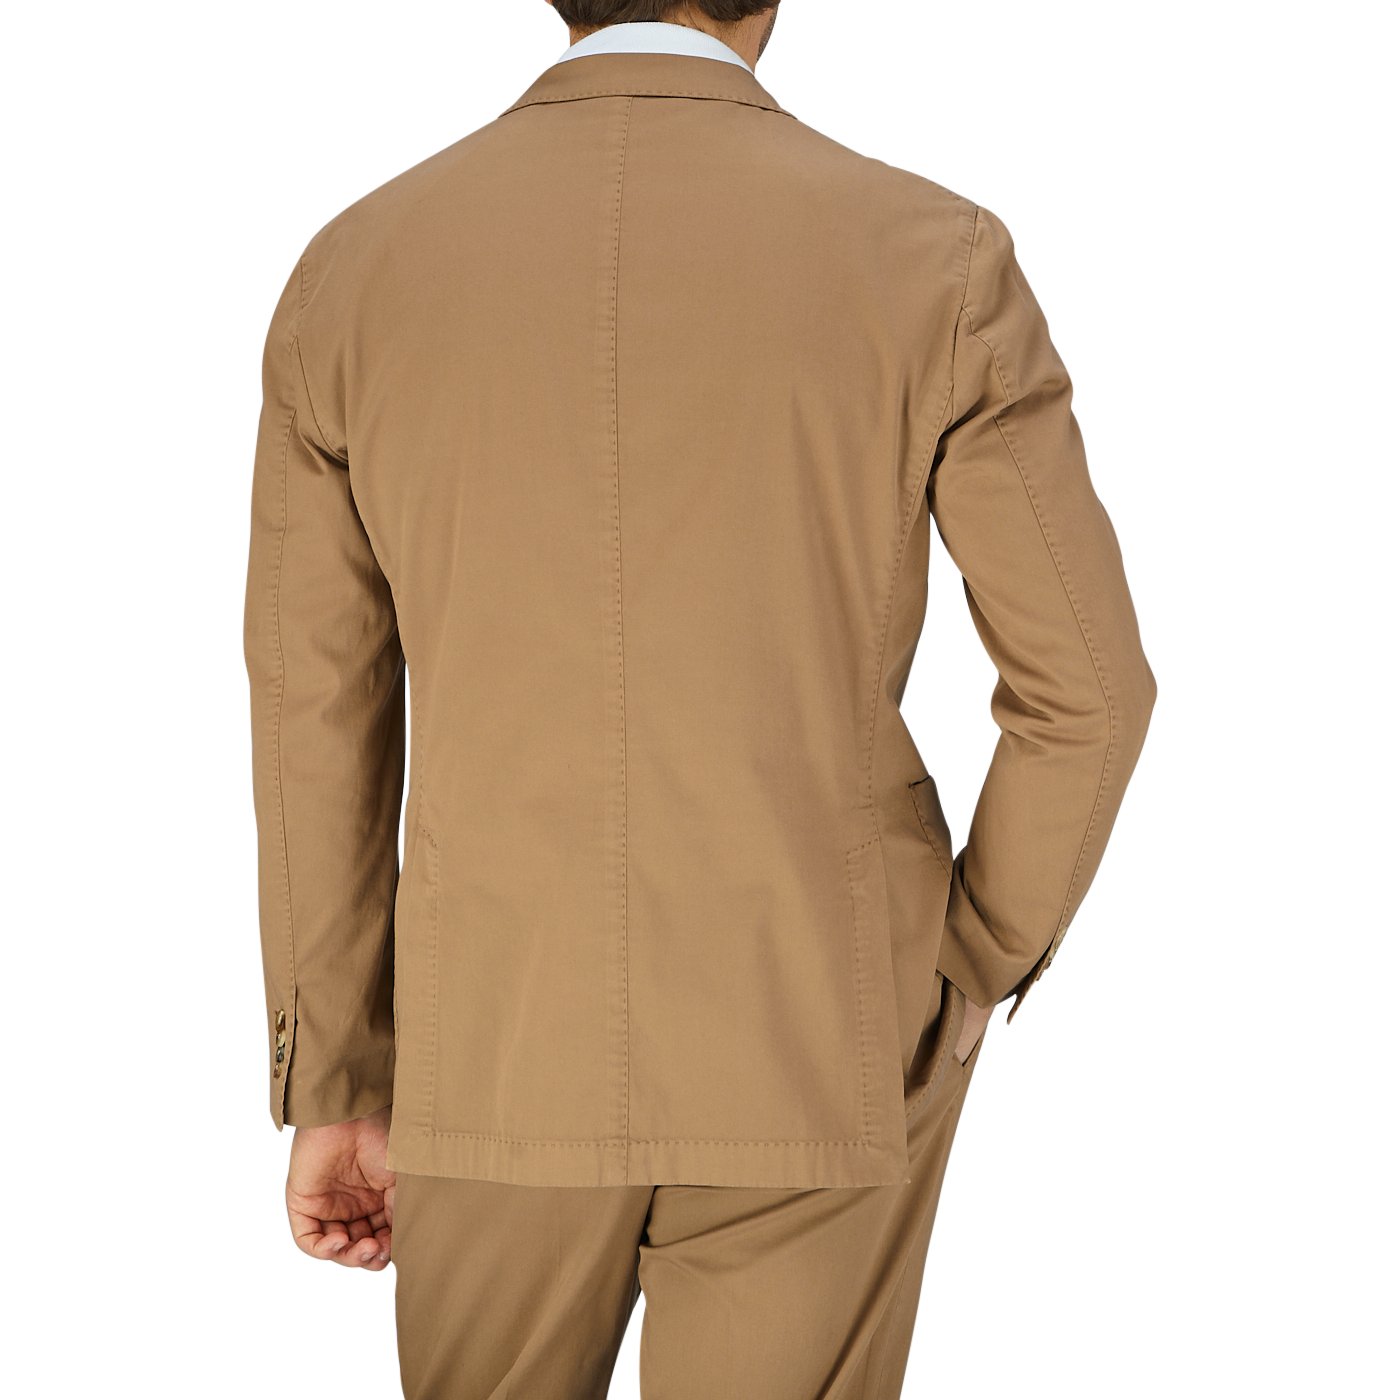 Man standing with his back to the camera wearing a beige, unstructured Boglioli Tobacco Brown Washed Cotton K jacket, crafted in Italy.